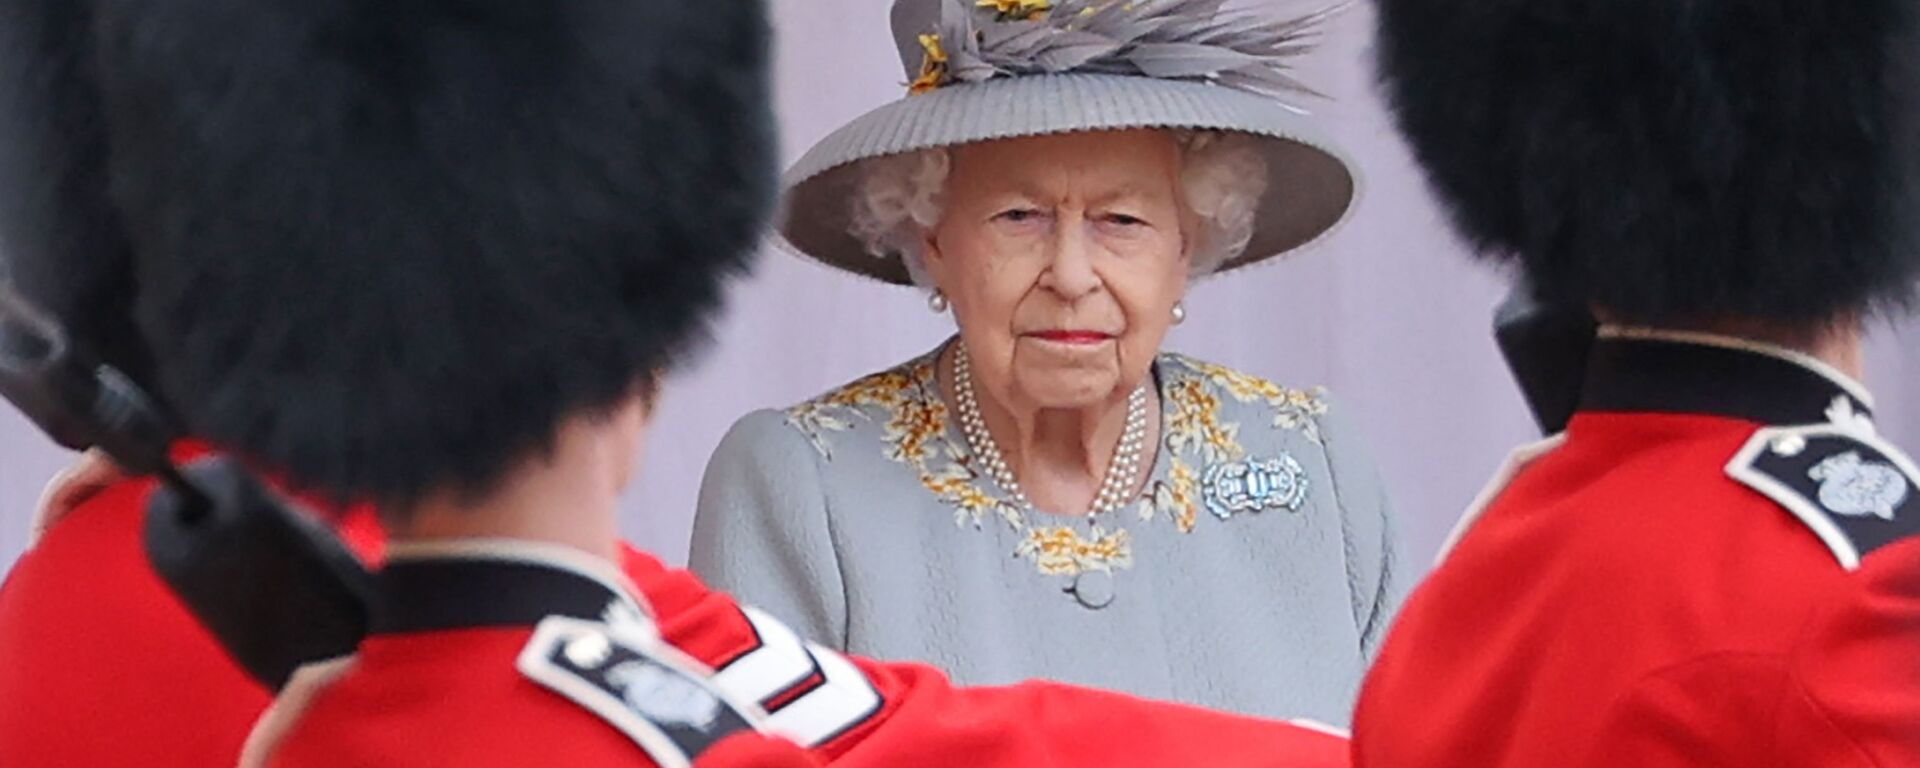 Britain's Queen Elizabeth II watches a military ceremony to mark her official birthday at Windsor Castle on June 12, 2021 in Windsor. - Sputnik International, 1920, 13.06.2021